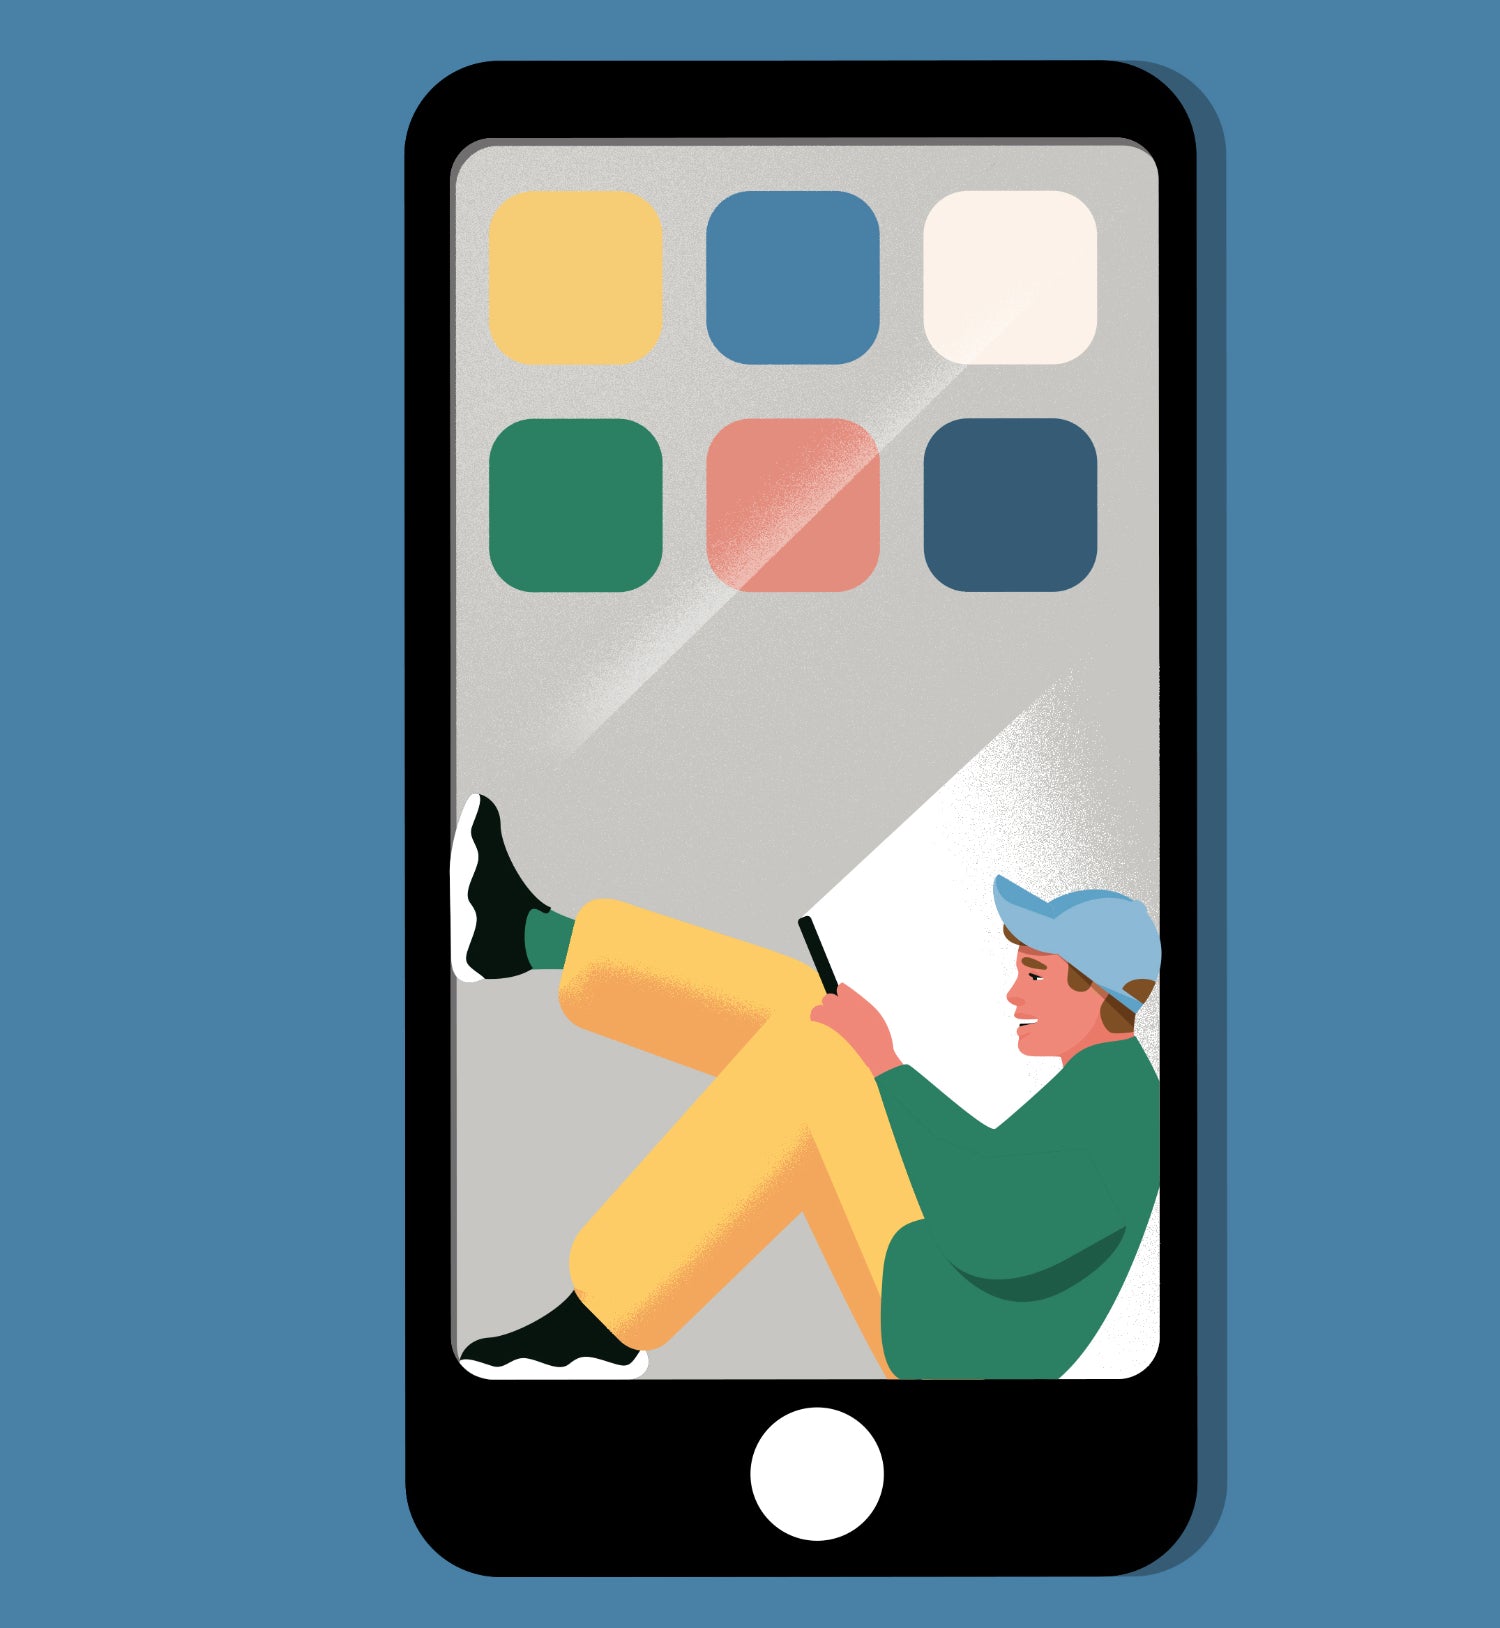 Illustration of a child sitting inside a cubby that resembles a smartphone screen